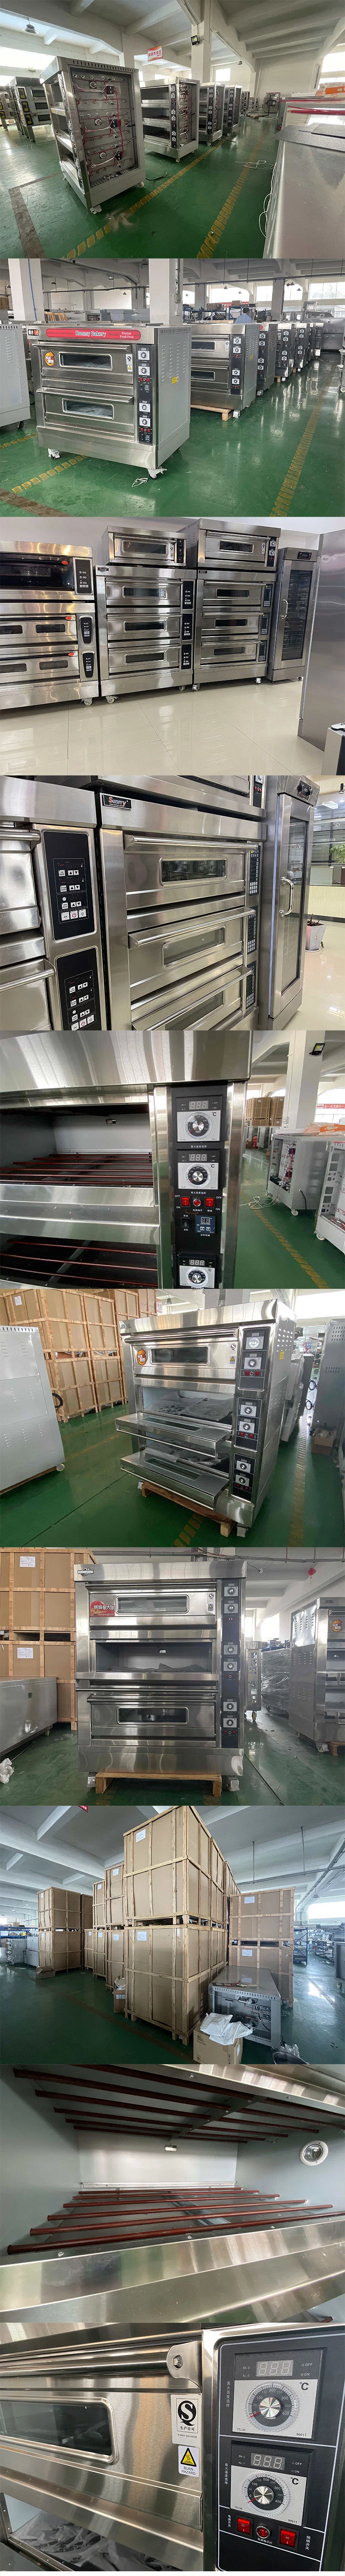 Electric Gas Bread Layer Deck Oven Industrial Commercial Bakery Baking Oven for Sale